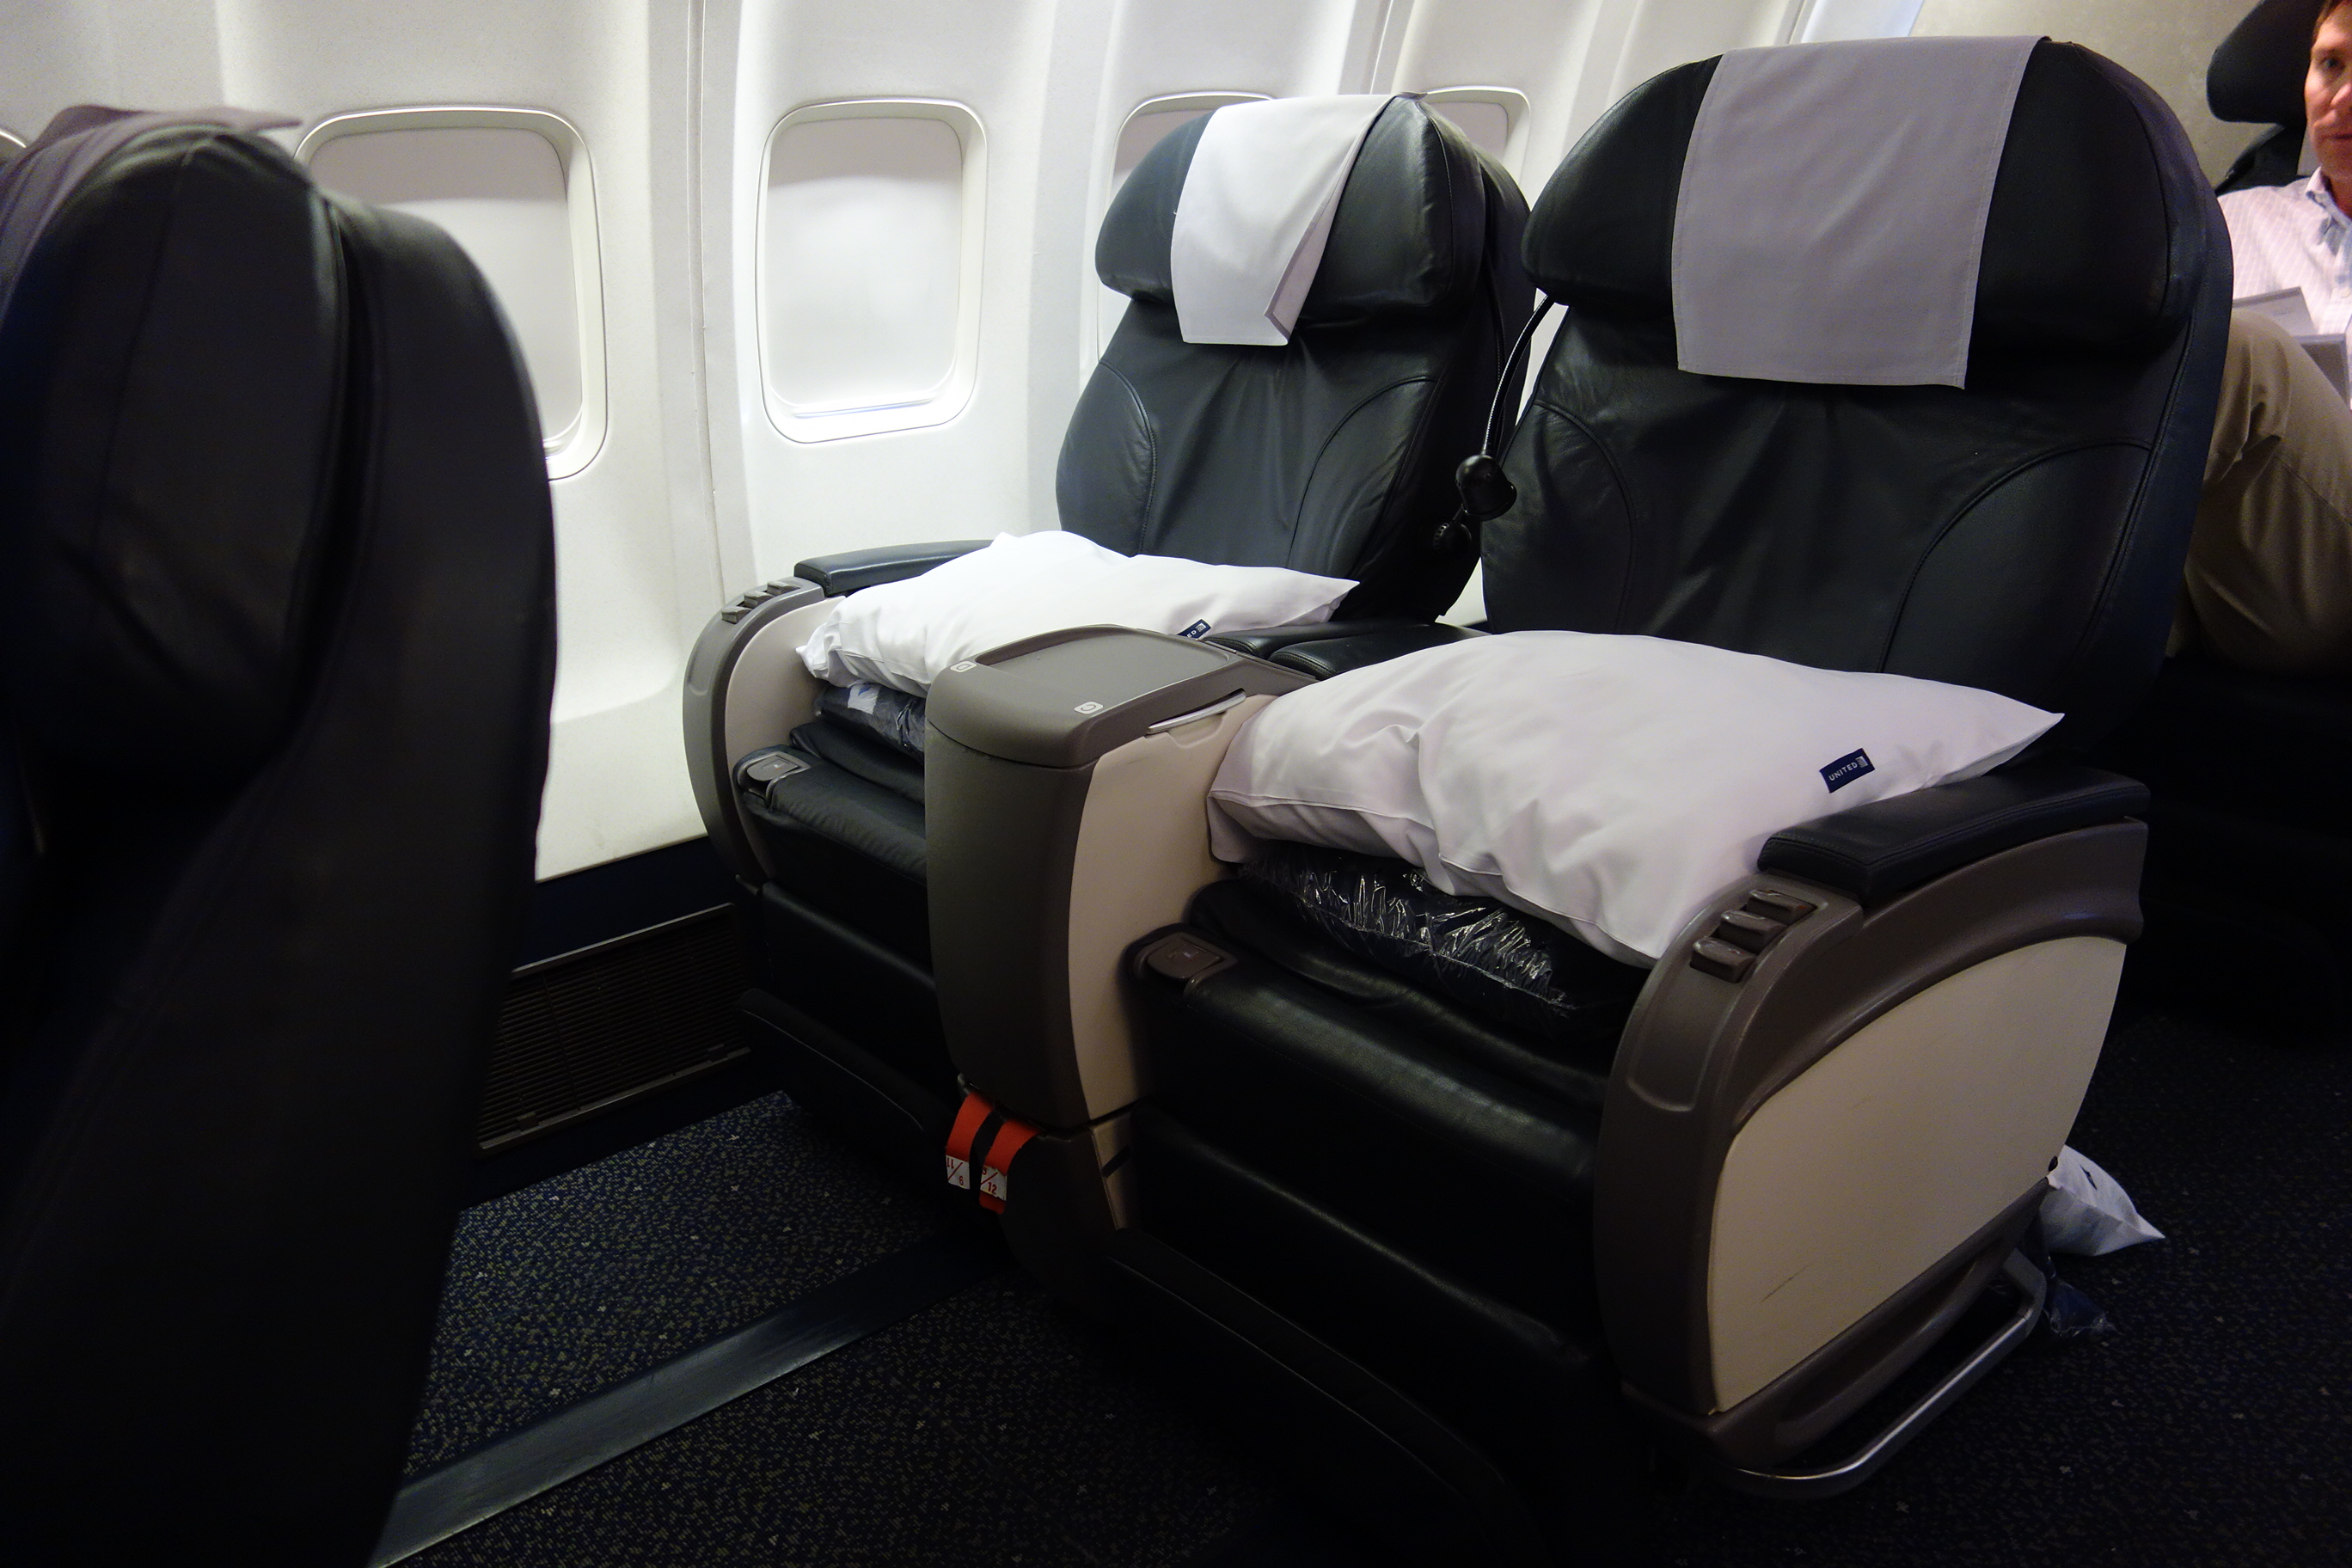 Old business class seats (not row 9)